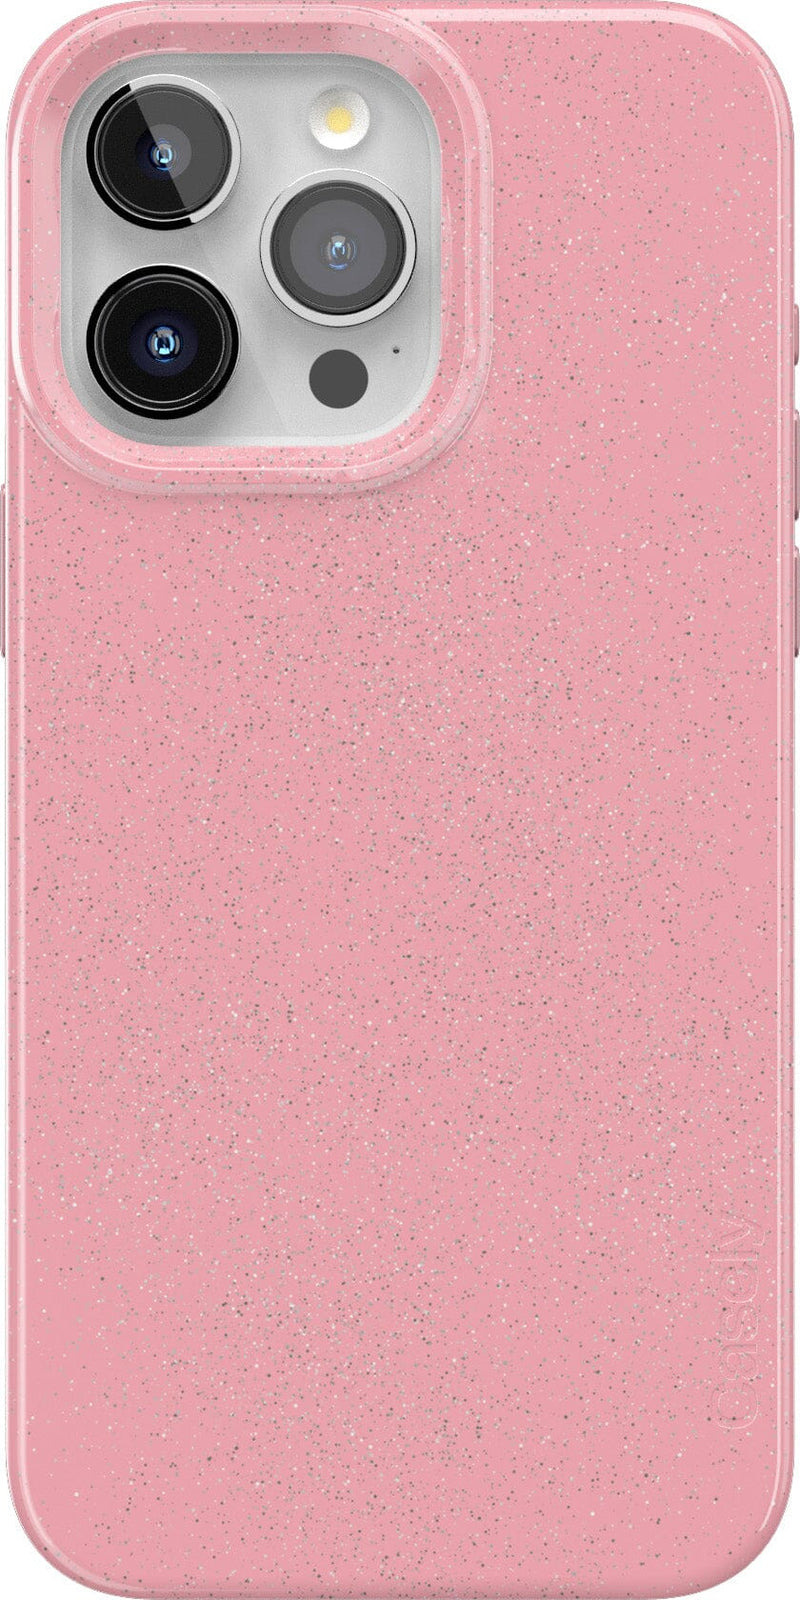 Sunkissed | Pink Pastel Shimmer Case iPhone Case get.casely